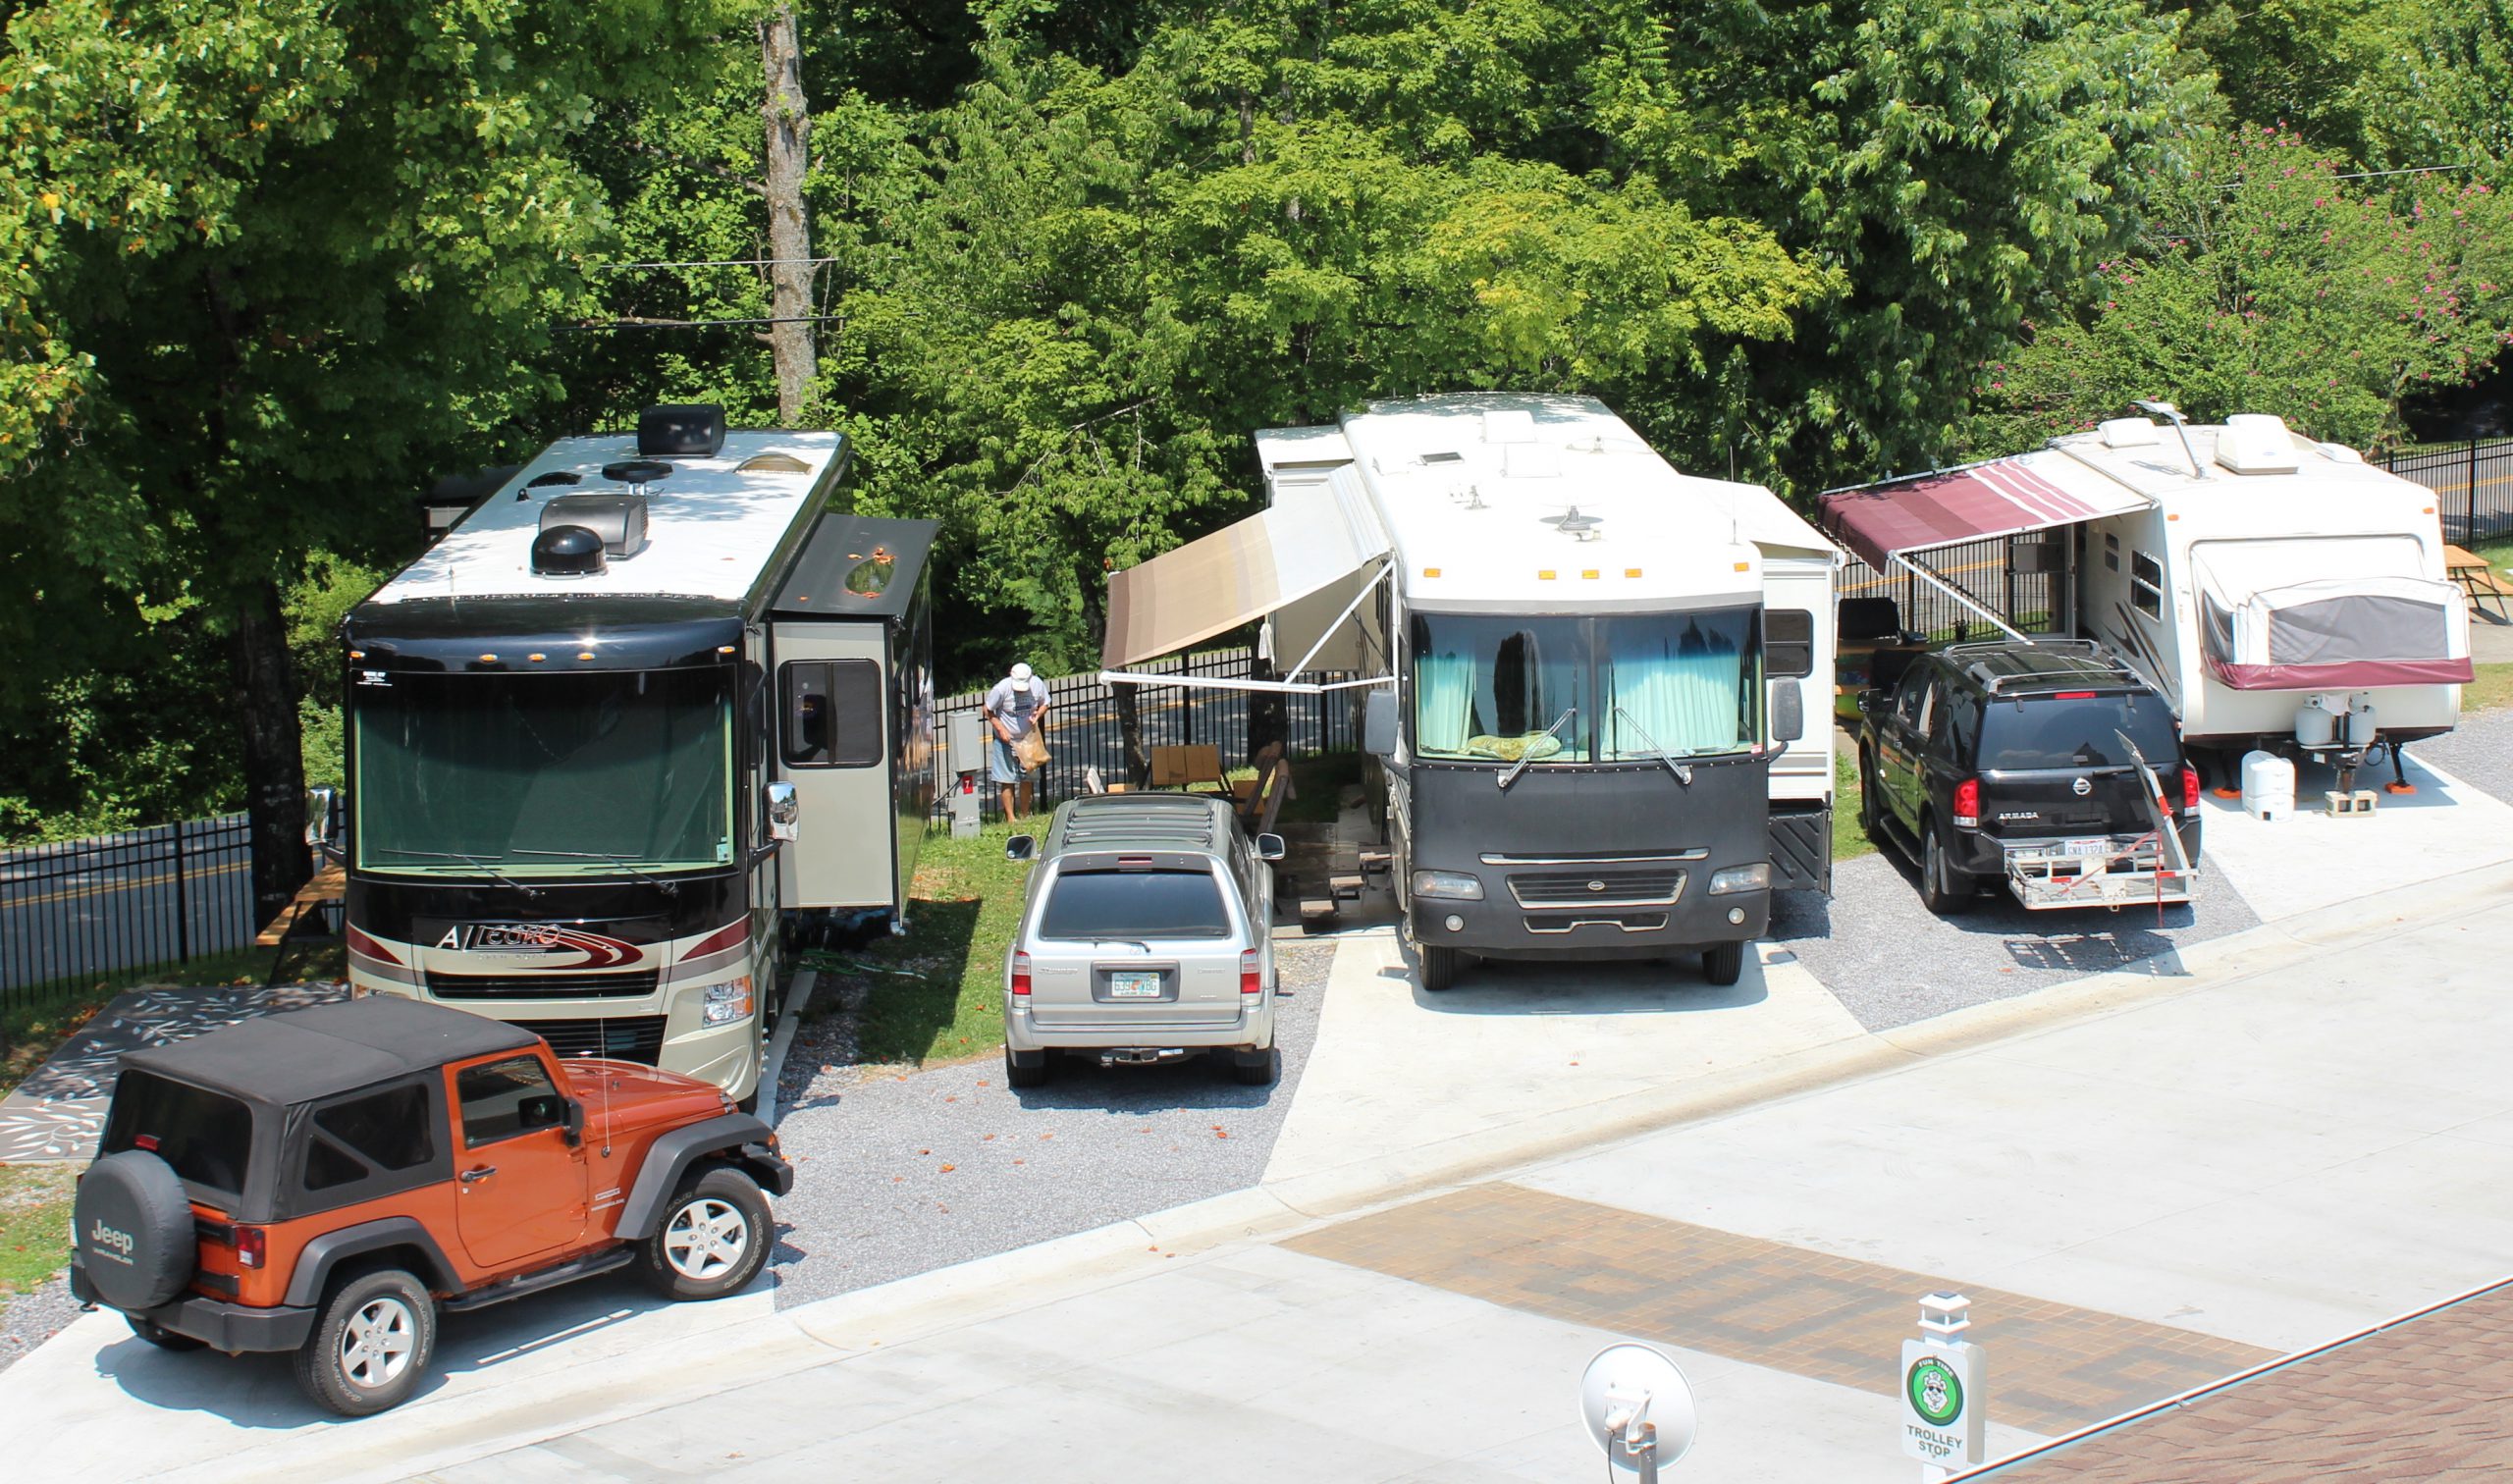 RVs parked in camping spaces